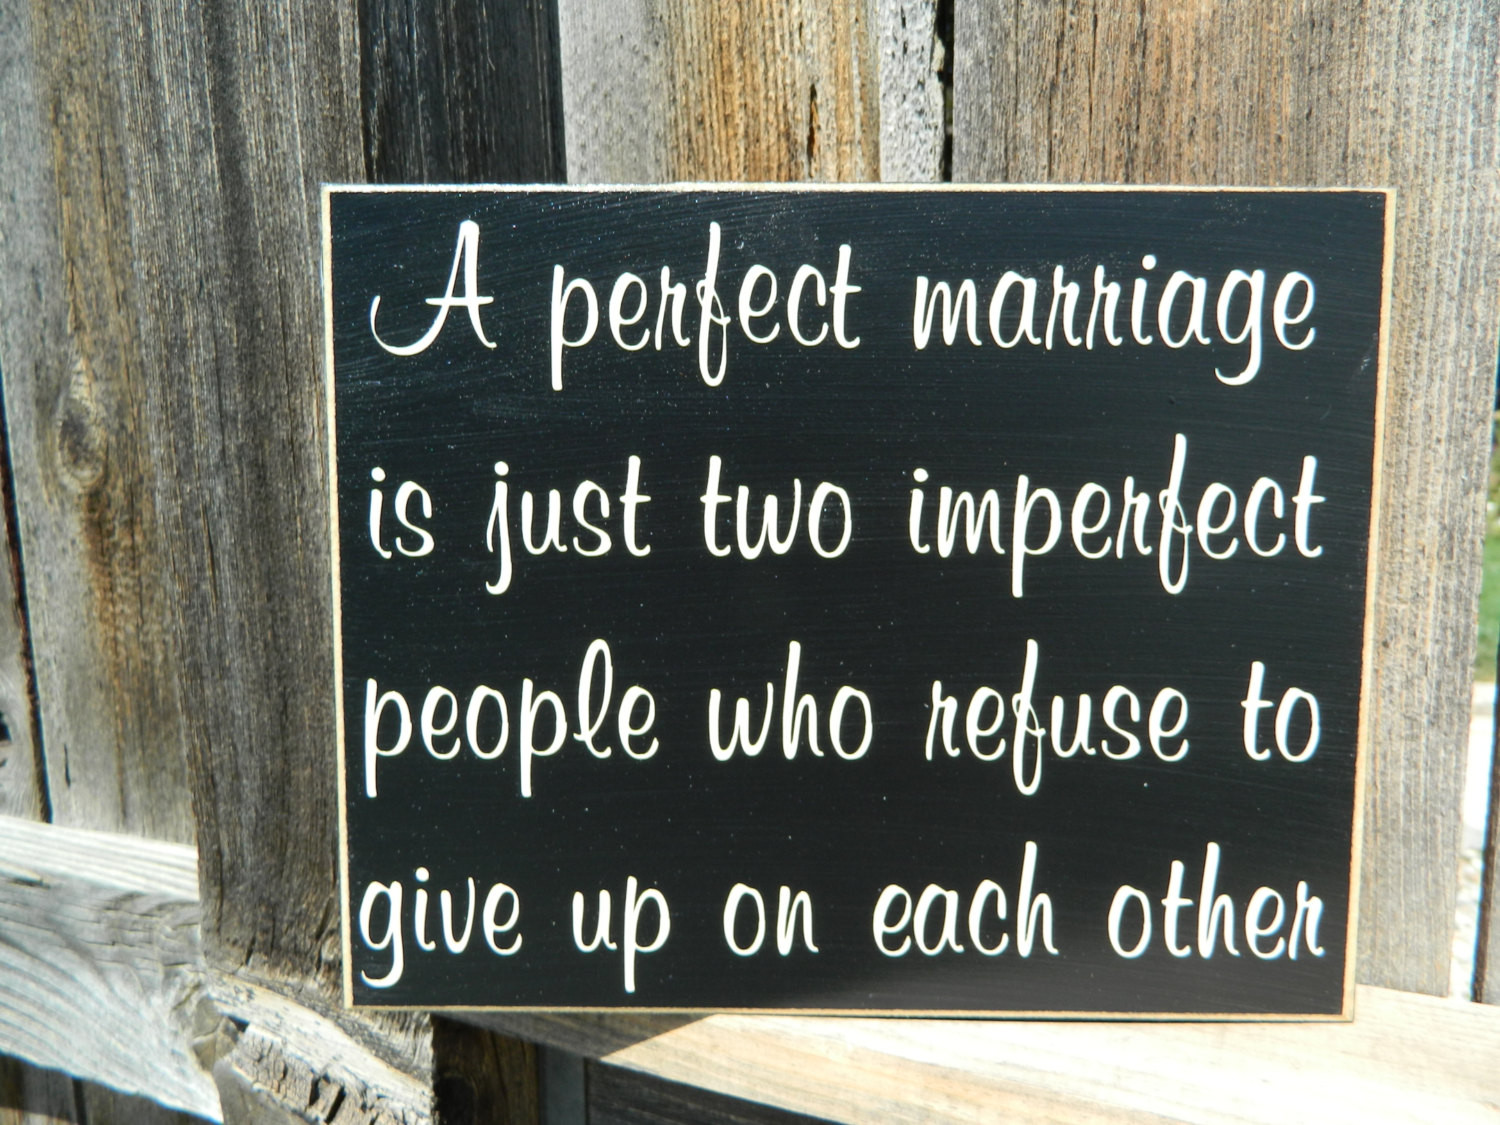 Positive Marriage Quotes
 Inspirational QuoteA perfect marriage wood sign